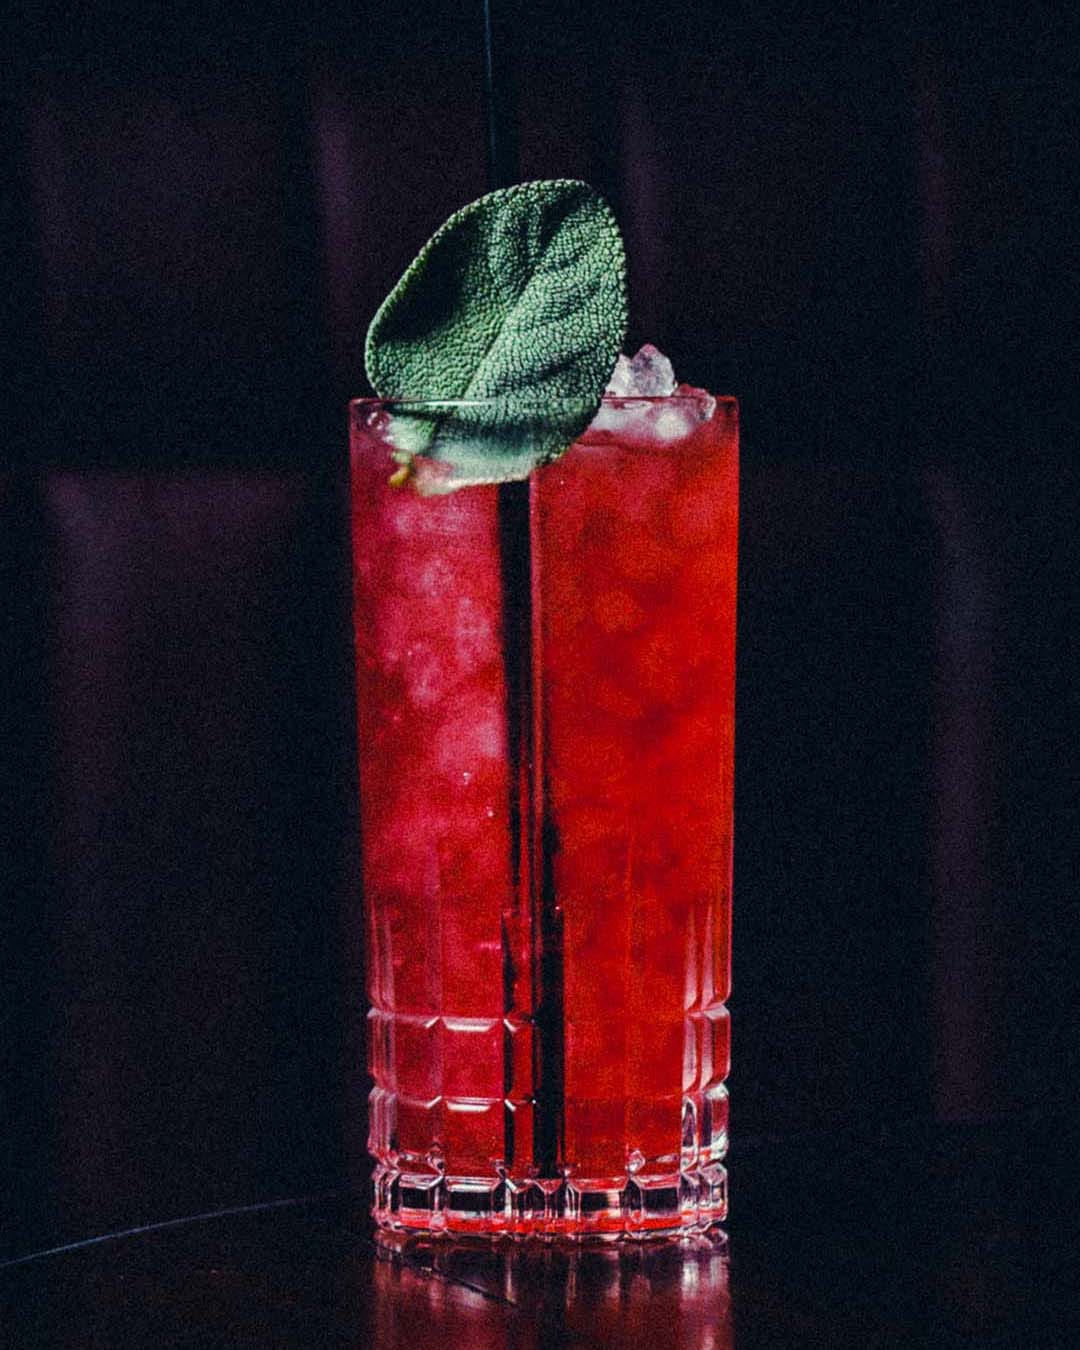 Get the recipe for the crowd-pleasing Pike Place Mule from Memphis Slim's House of Blues